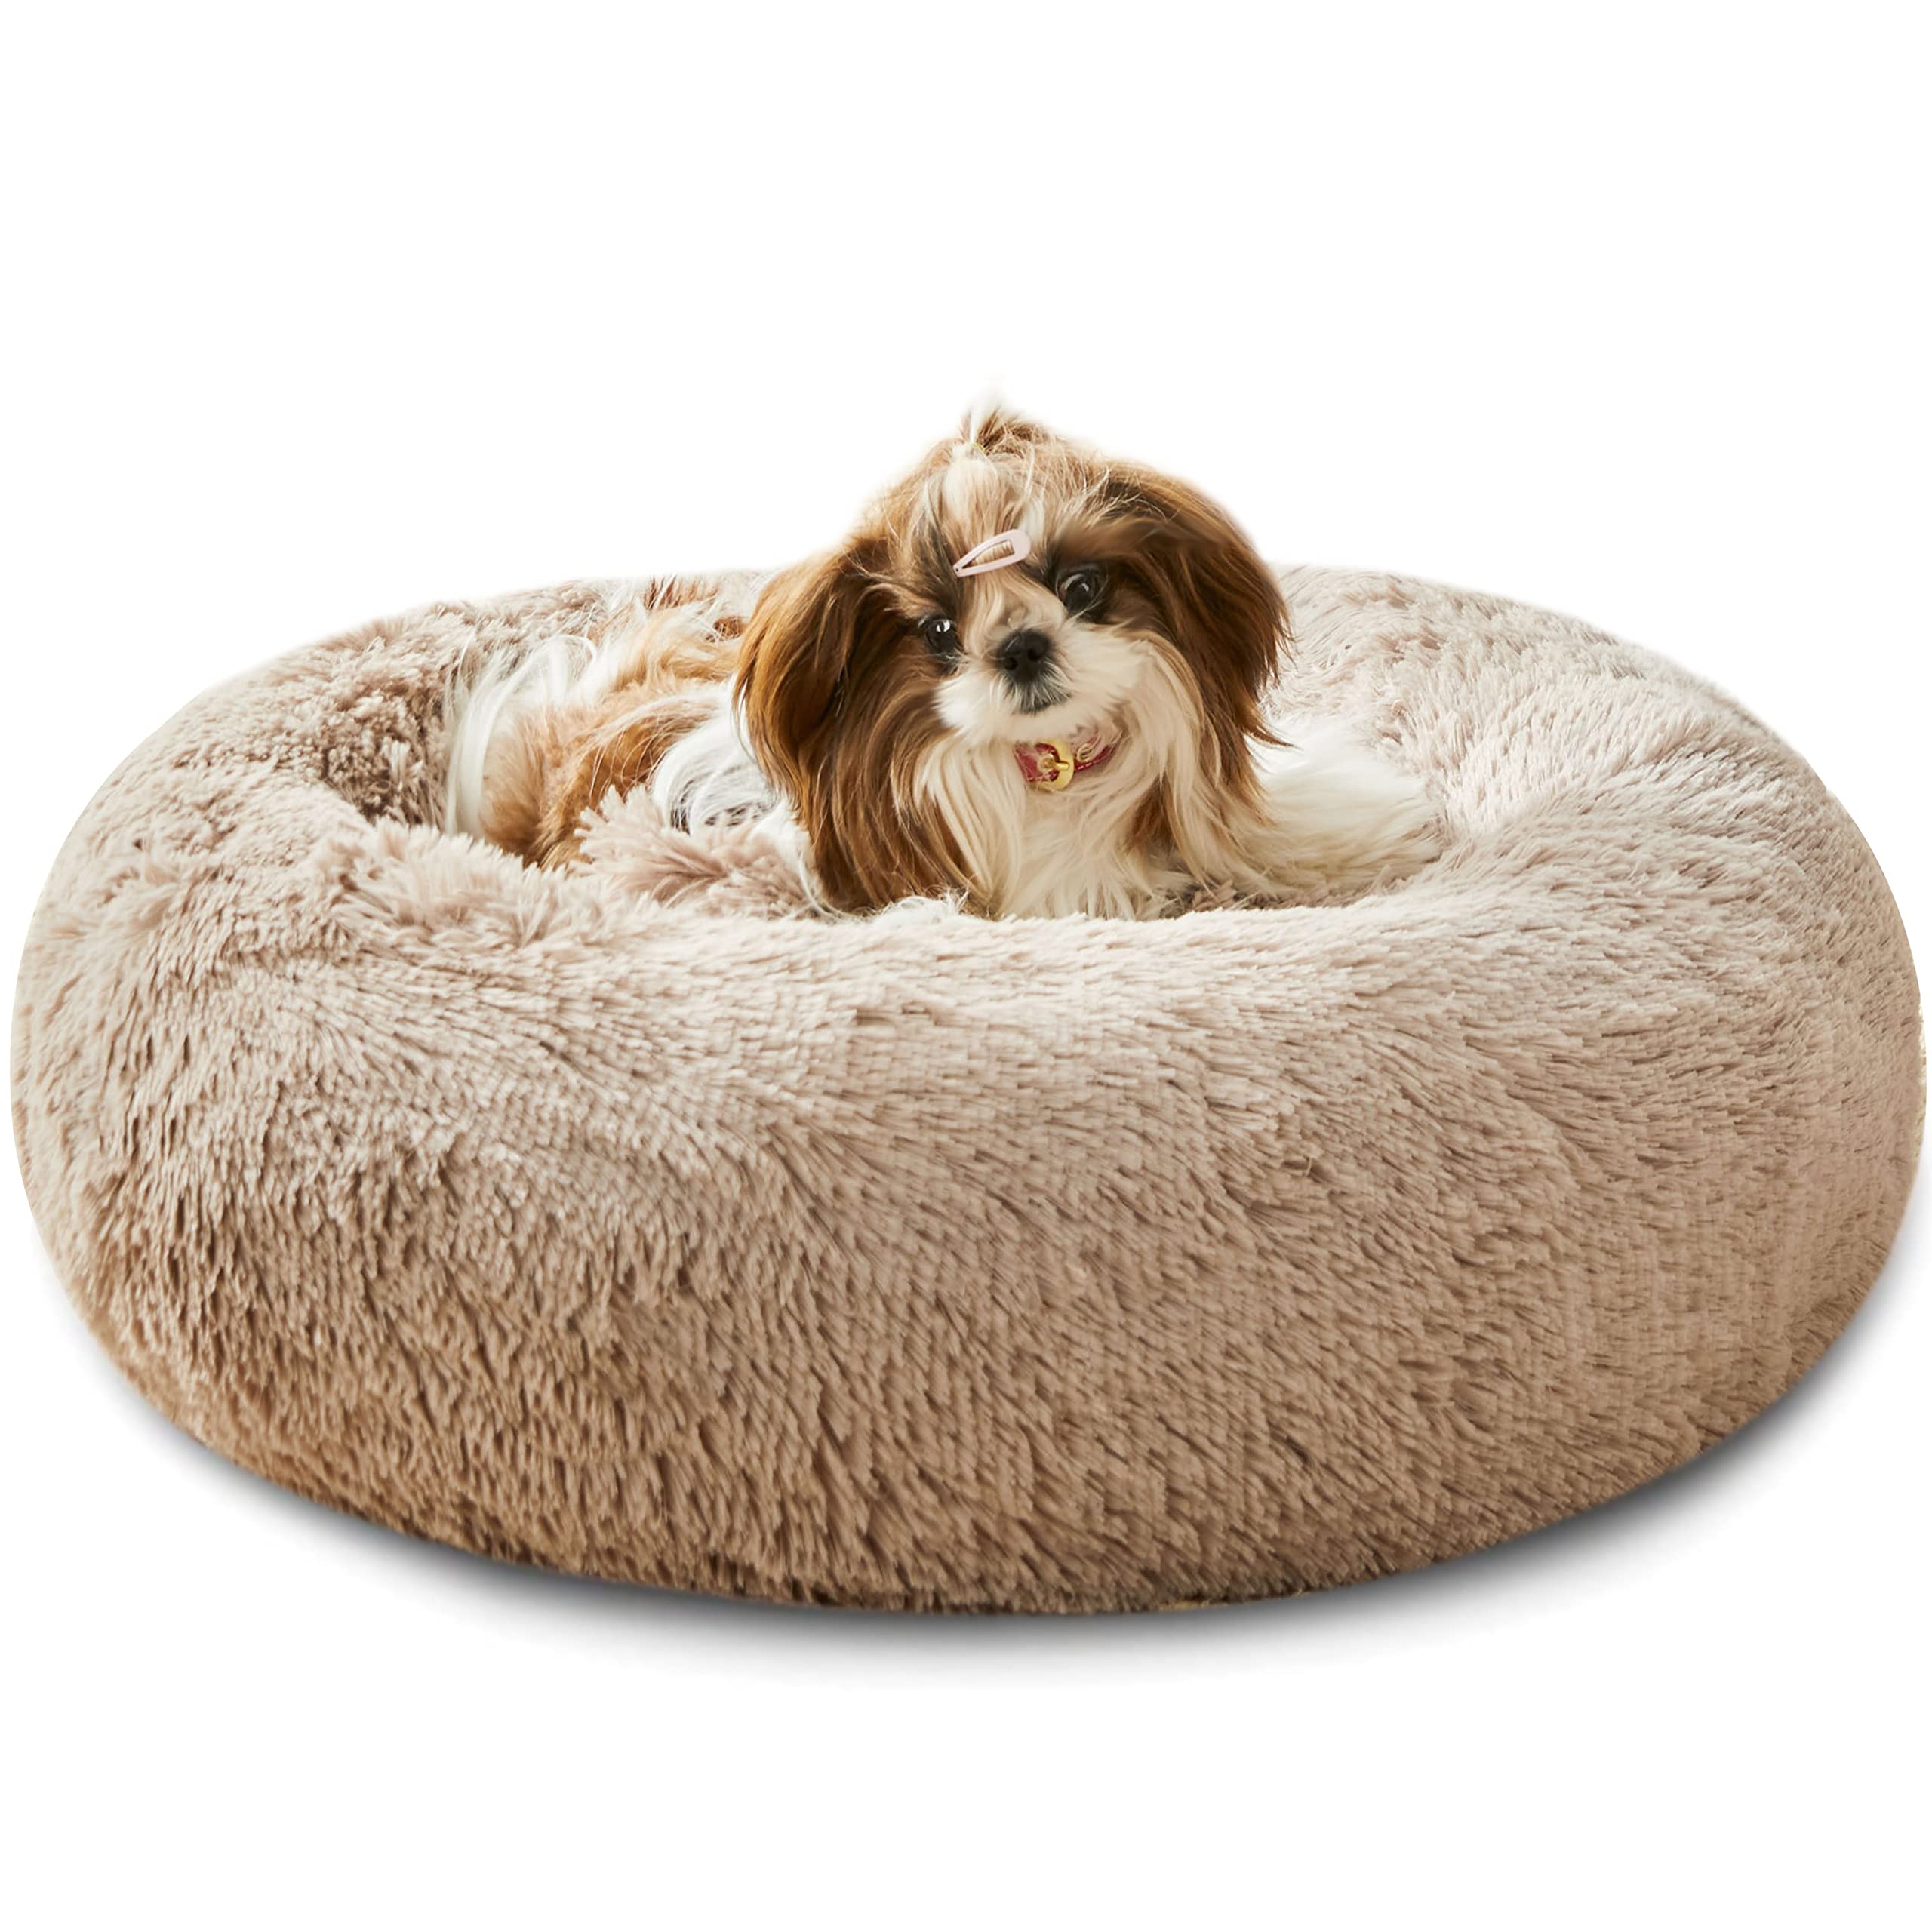  WESTERN HOME WH Western Home Faux Fur Dog Bed & Cat Bed, Original Calming Dog Bed for Small Medium Pet, Anti Anxiety Donut Cuddler Round Warm Bed for Dogs with Fluffy Comfy Plush Kennel Cushion(20